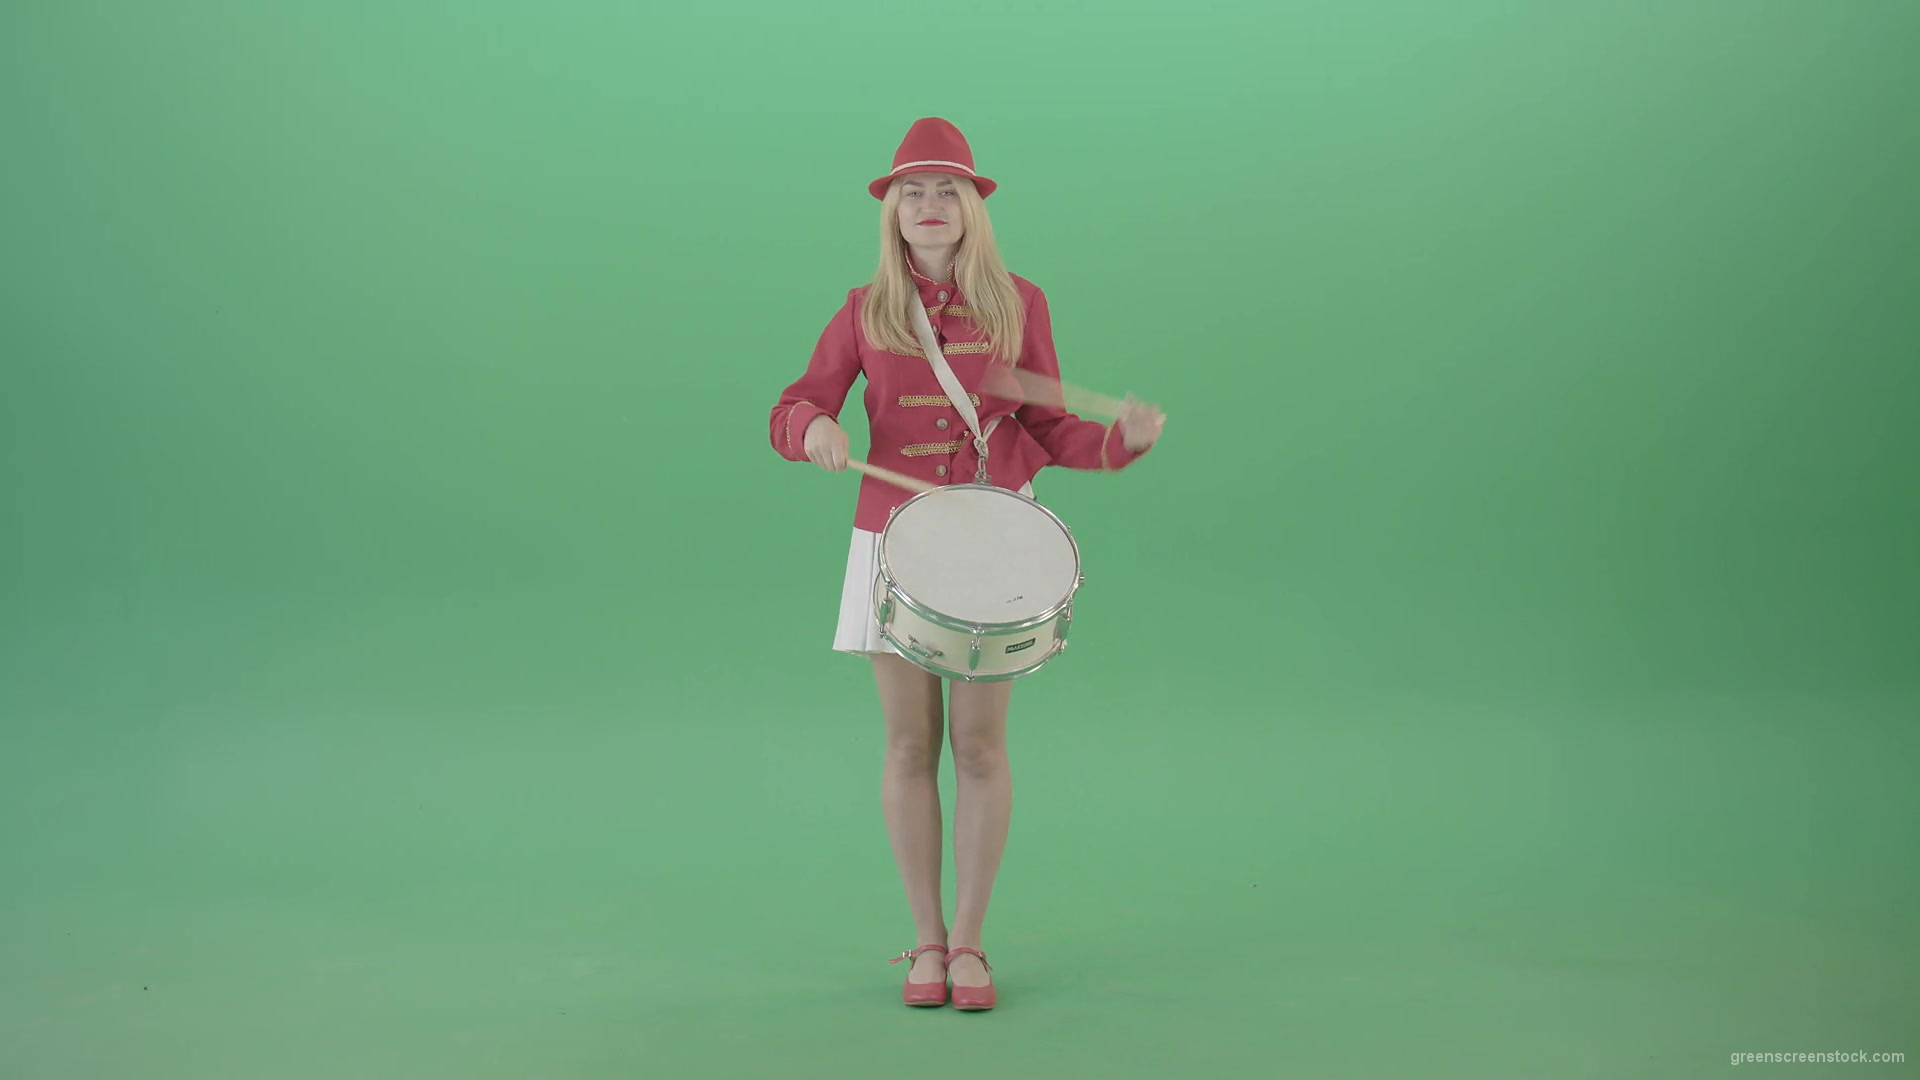 Girl-in-18-Century-military-uniform-play-snare-drum-isolated-on-green-screen-4K-Video-Footage-1920_004 Green Screen Stock